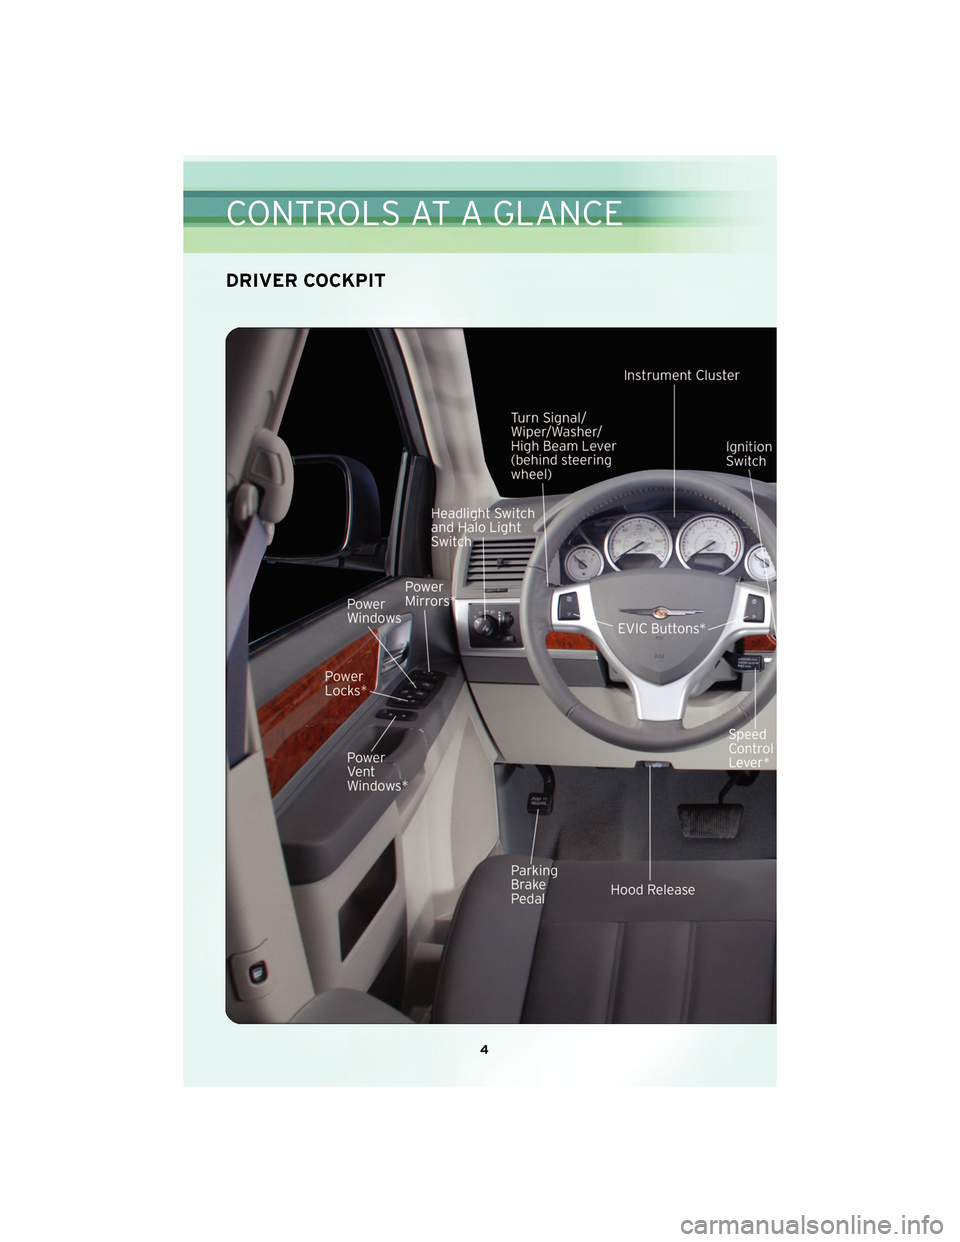 CHRYSLER TOWN AND COUNTRY 2010 5.G User Guide DRIVER COCKPIT
4
CONTROLS AT A GLANCE 